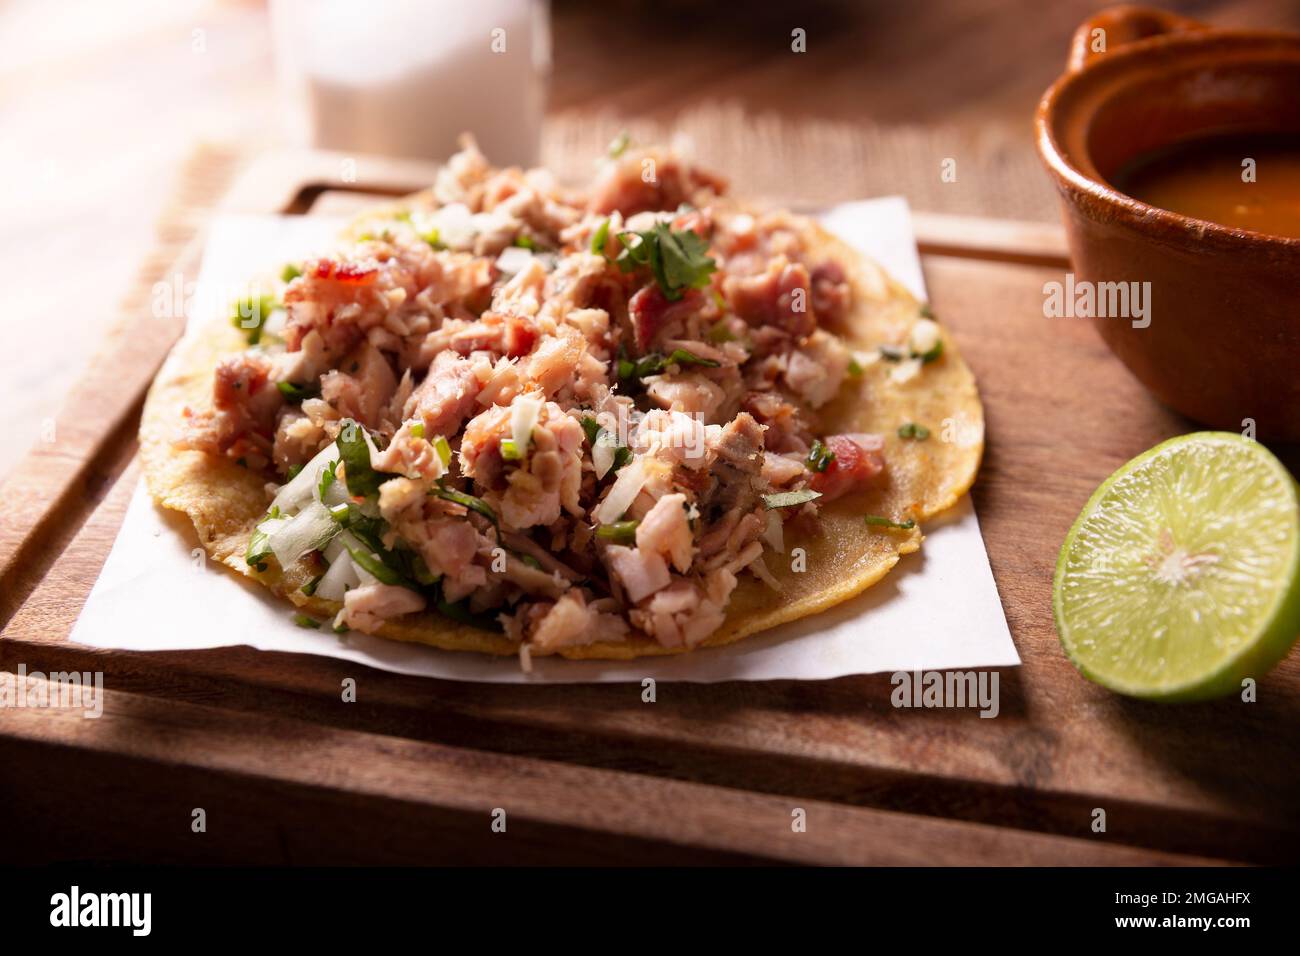 Taco de Carnitas. Cornmeal tortilla with deep fried pork. Traditional Mexican appetizer commonly accompanied by cilantro, onion and hot sauce. Stock Photo